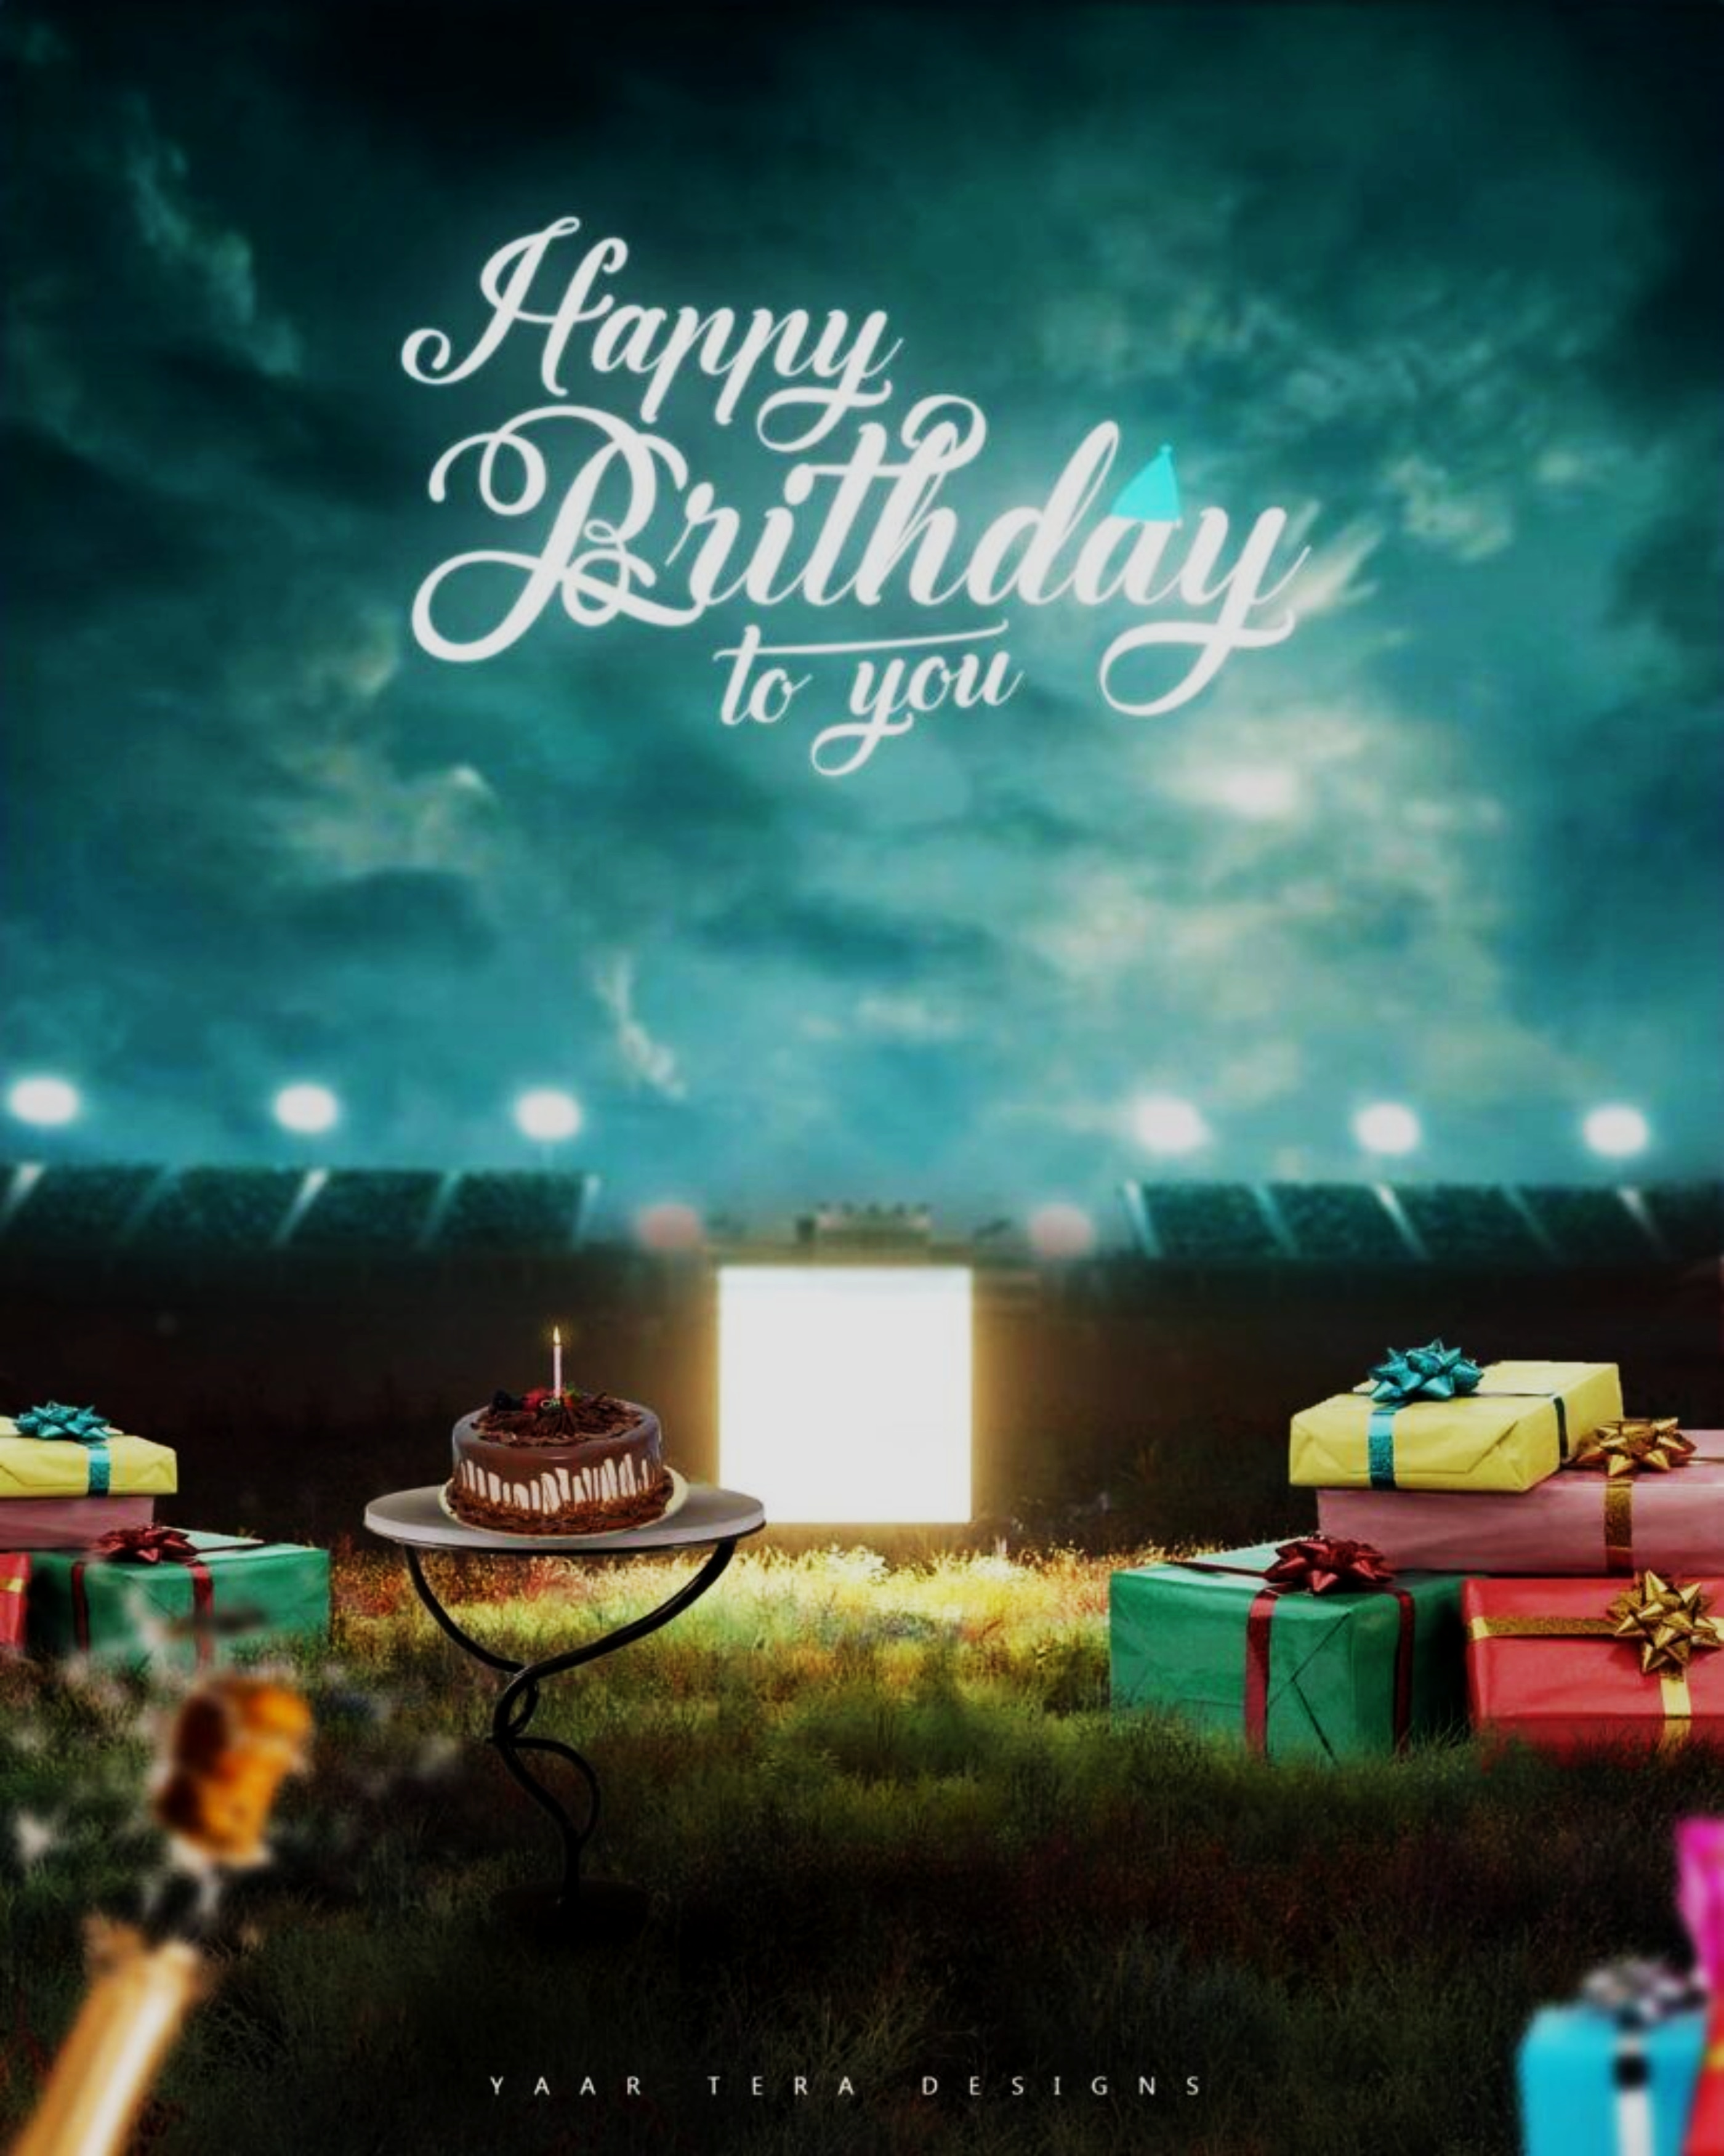 You are currently viewing Happy birthday image editing background download hd free